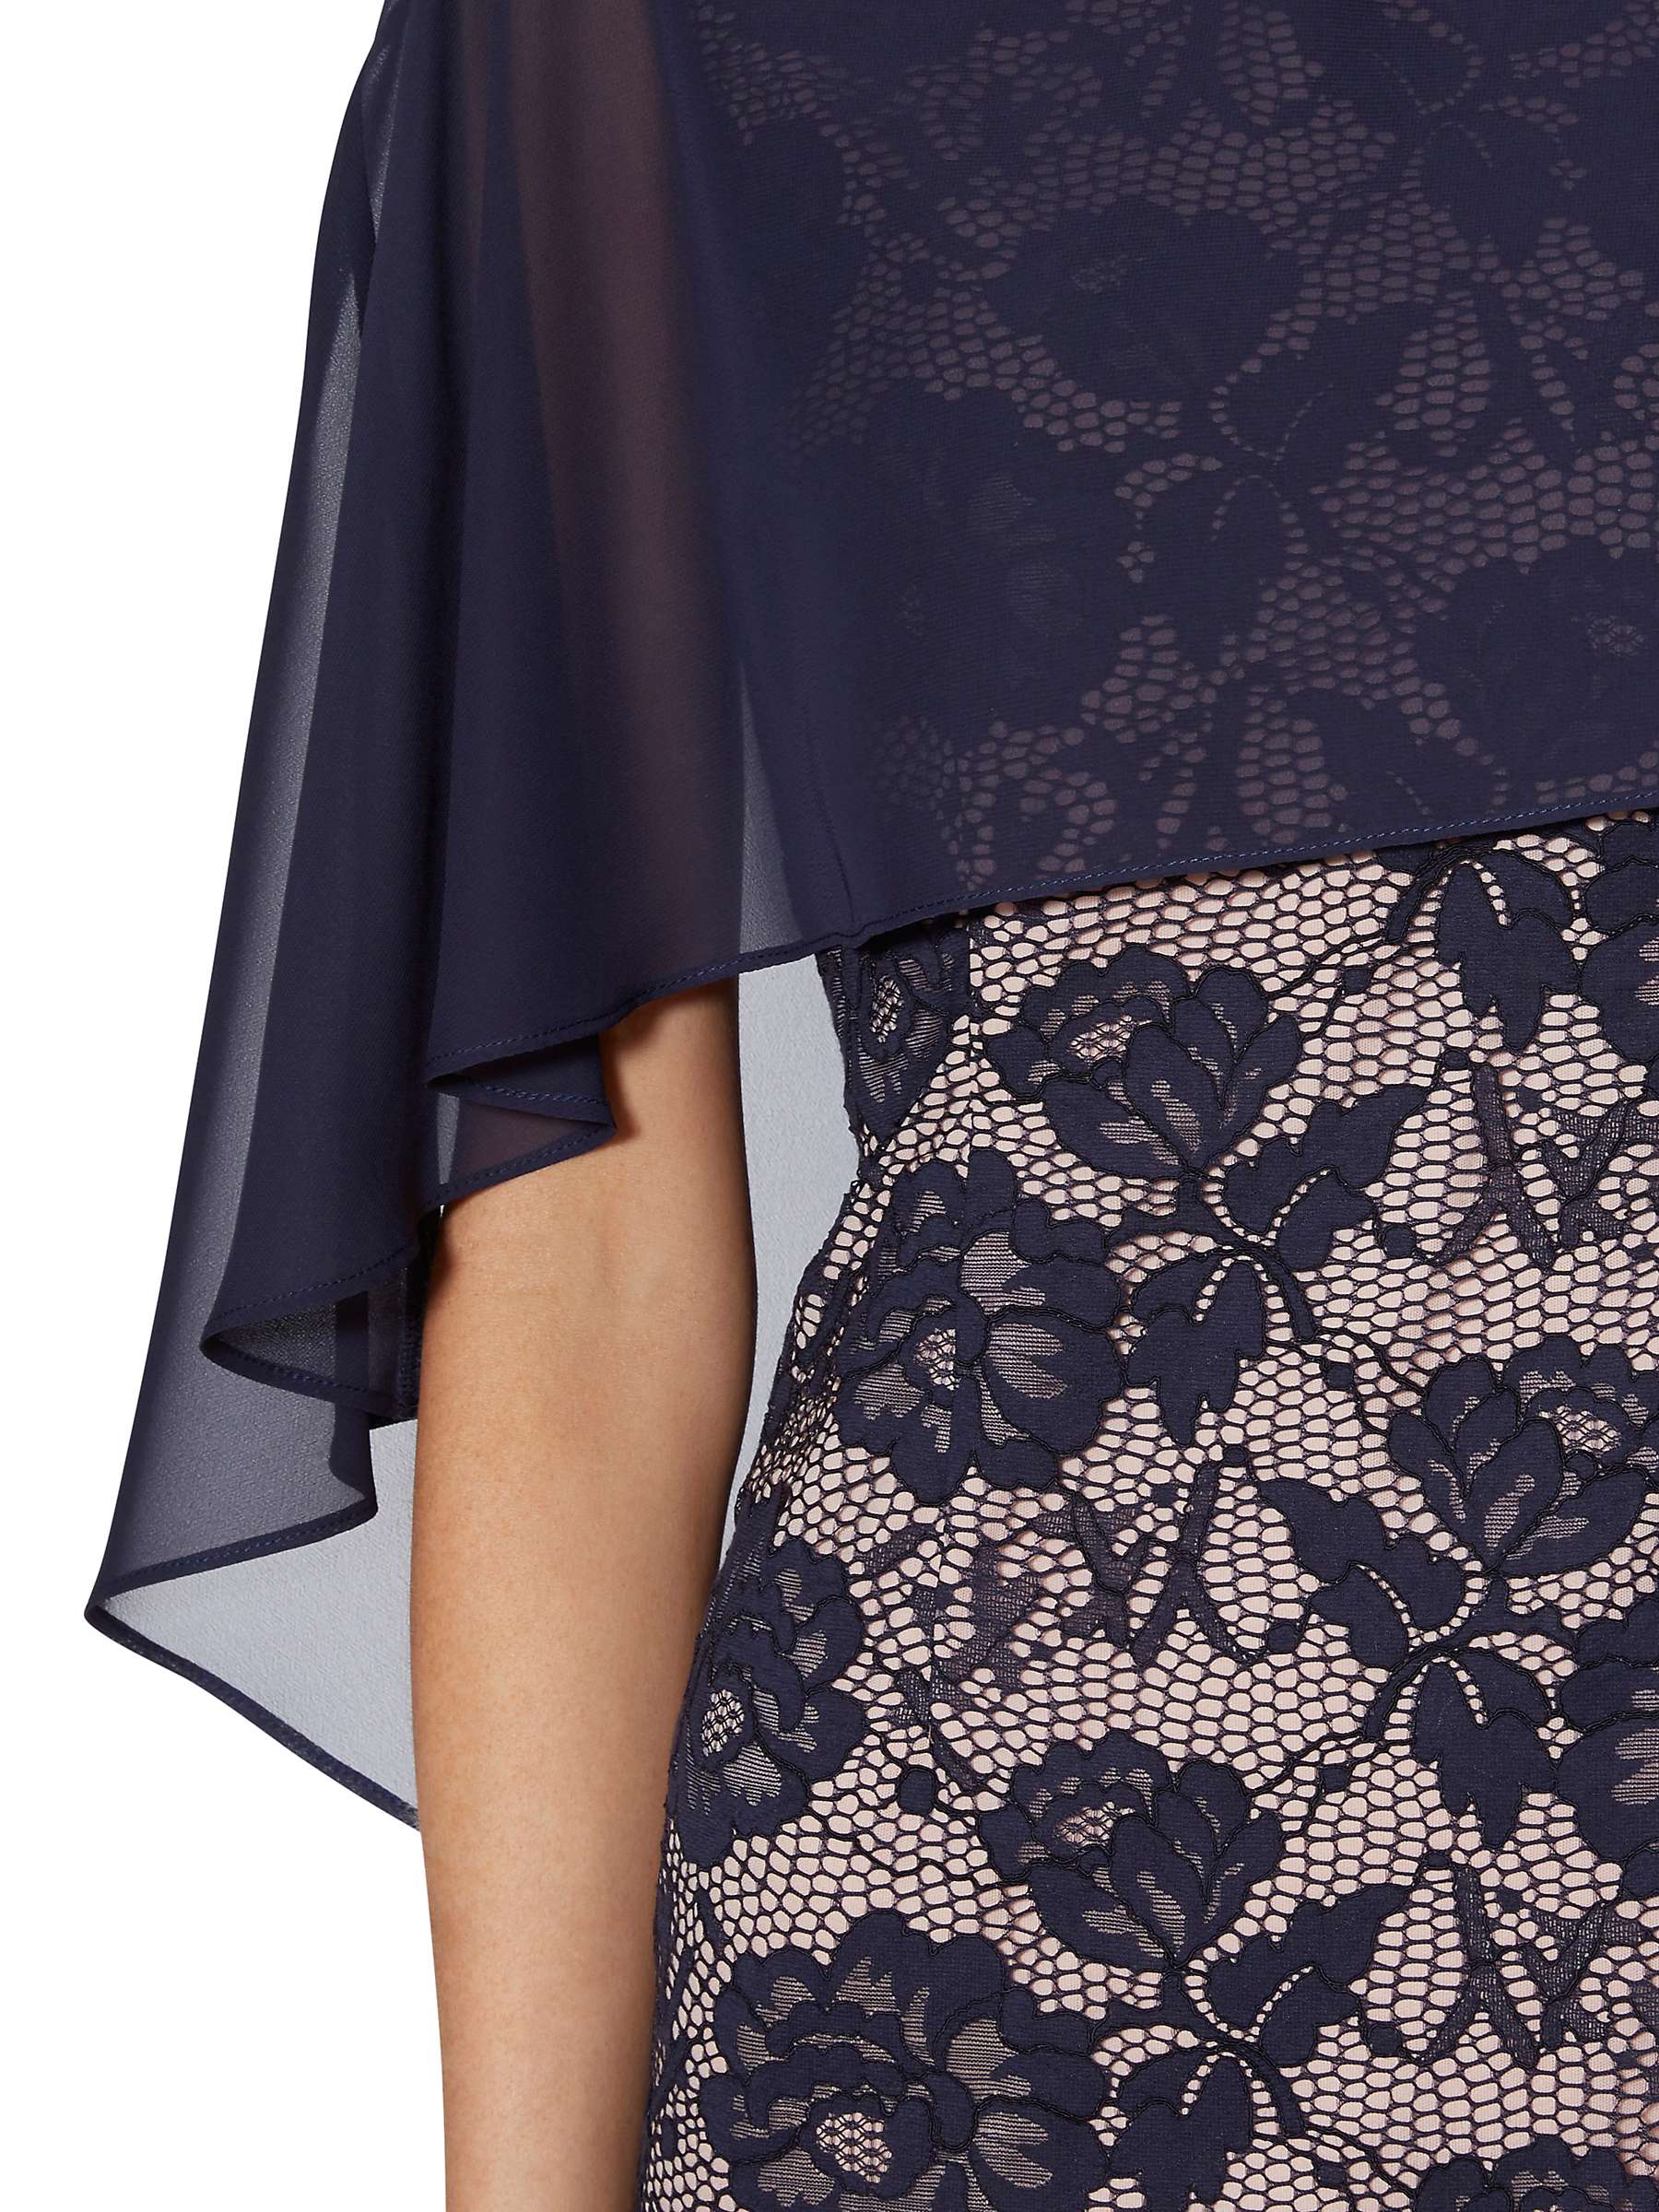 Buy Gina Bacconi Minnie Floral Embroidery Dress, Navy Online at johnlewis.com